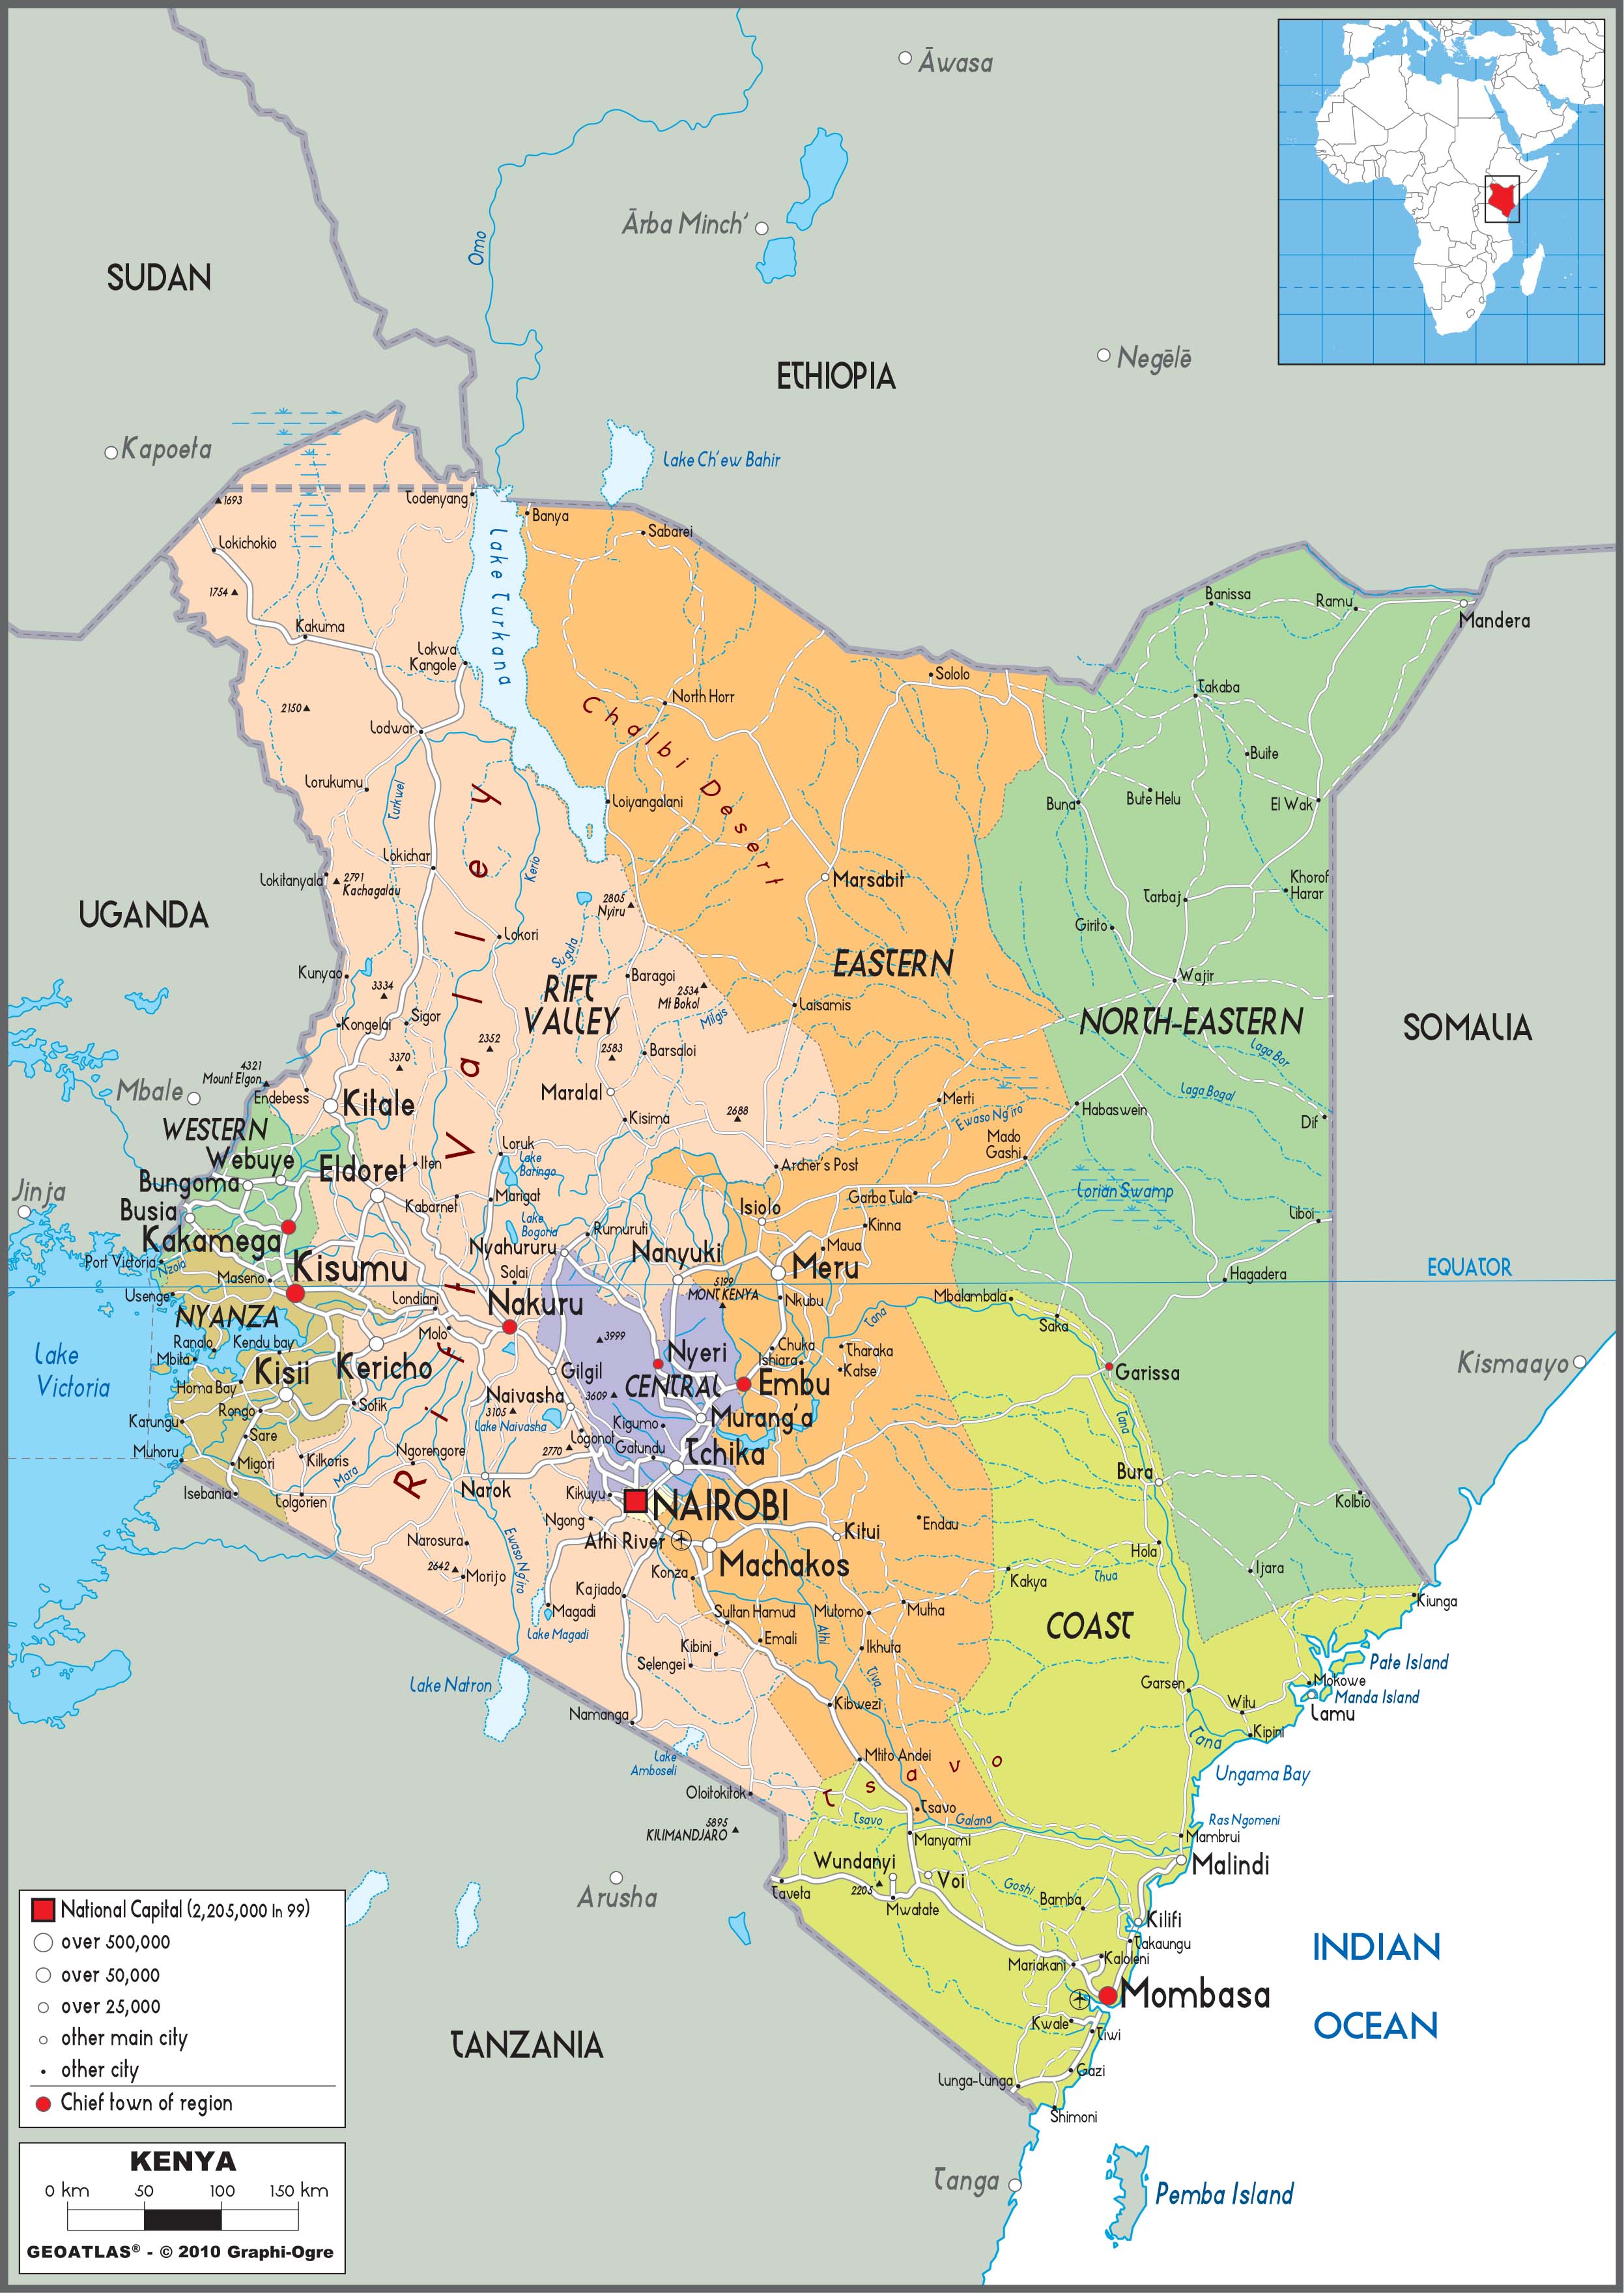 Kenya Political Wall Map by GraphiOgre - MapSales